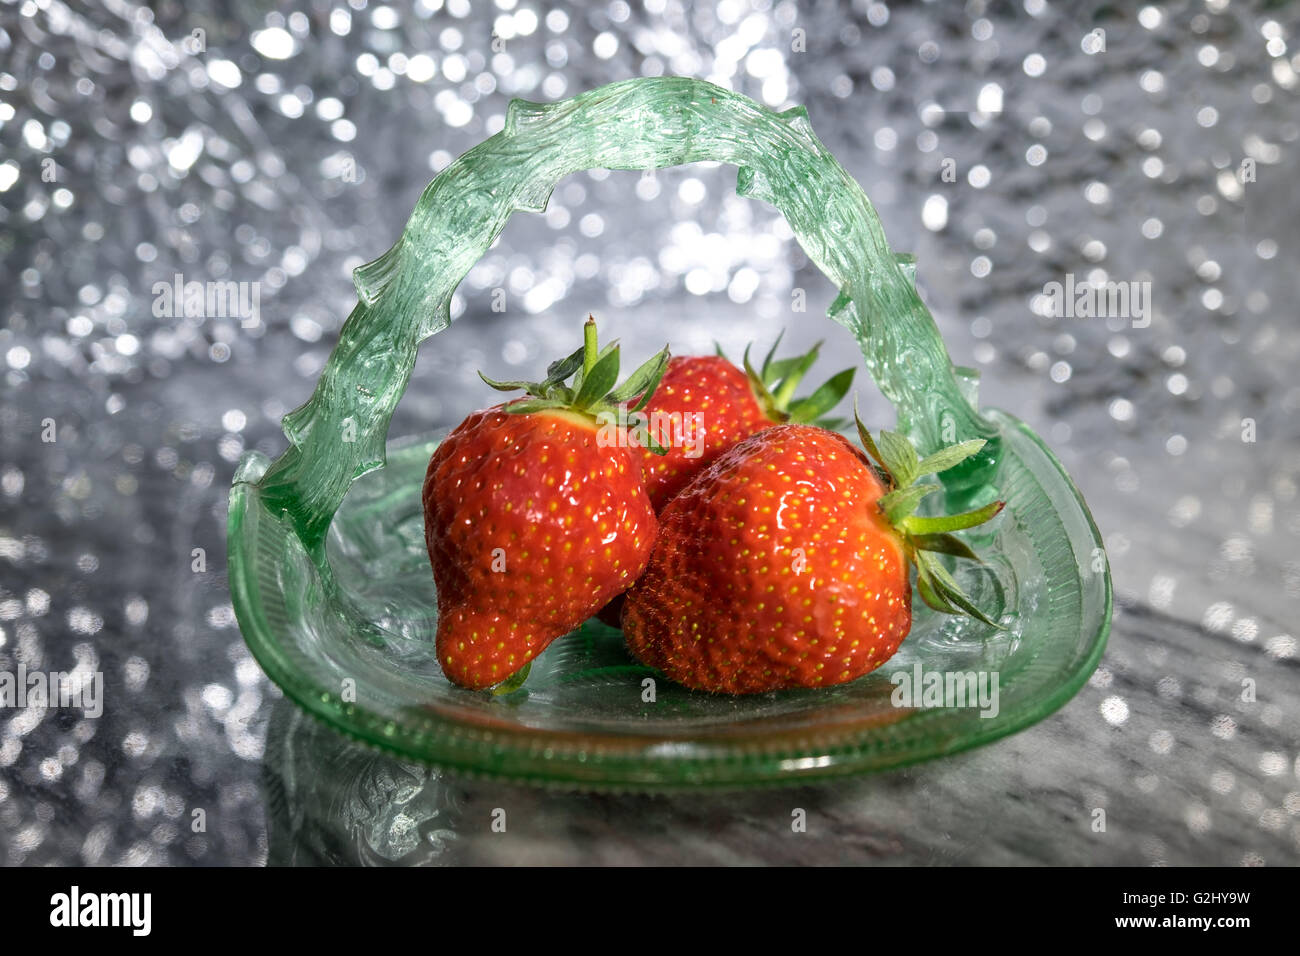 Green glass dish of strawberries against a sparkly background Stock Photo